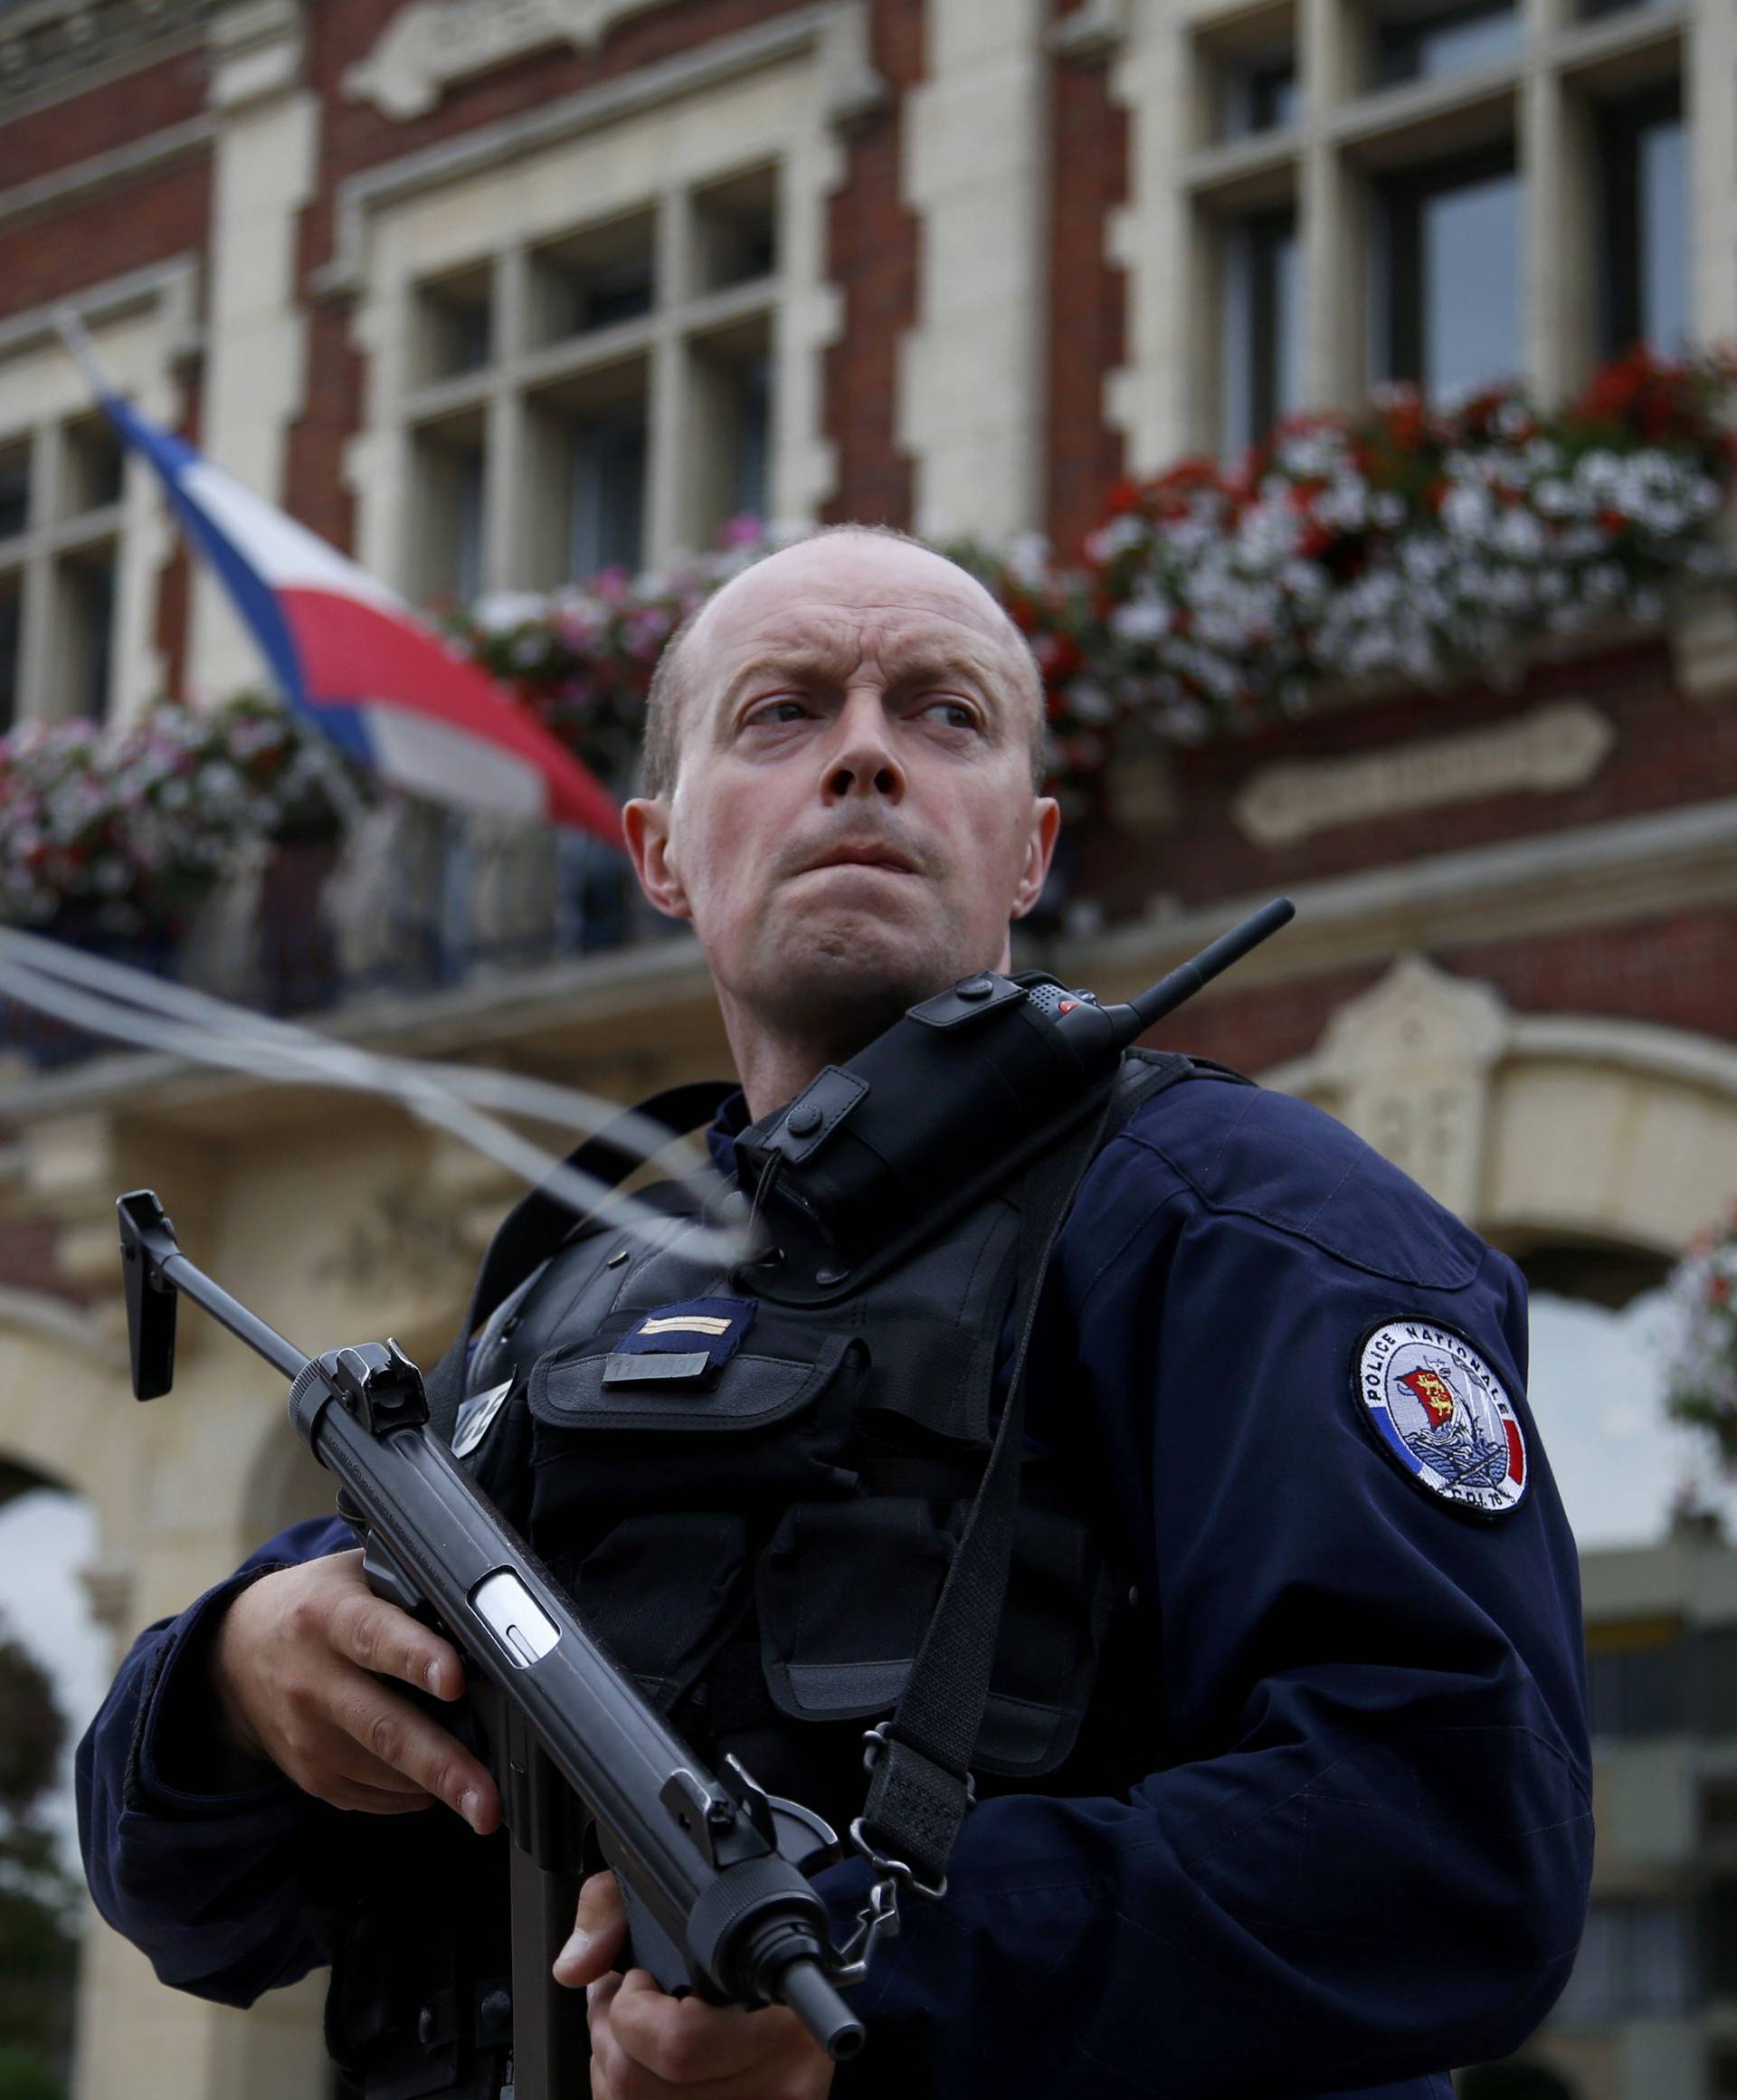 A policeman secures the position in front of the city hall after two assailants had taken five people hostage in the church at Saint-Etienne-du -Rouvray near Rouen in Normandy